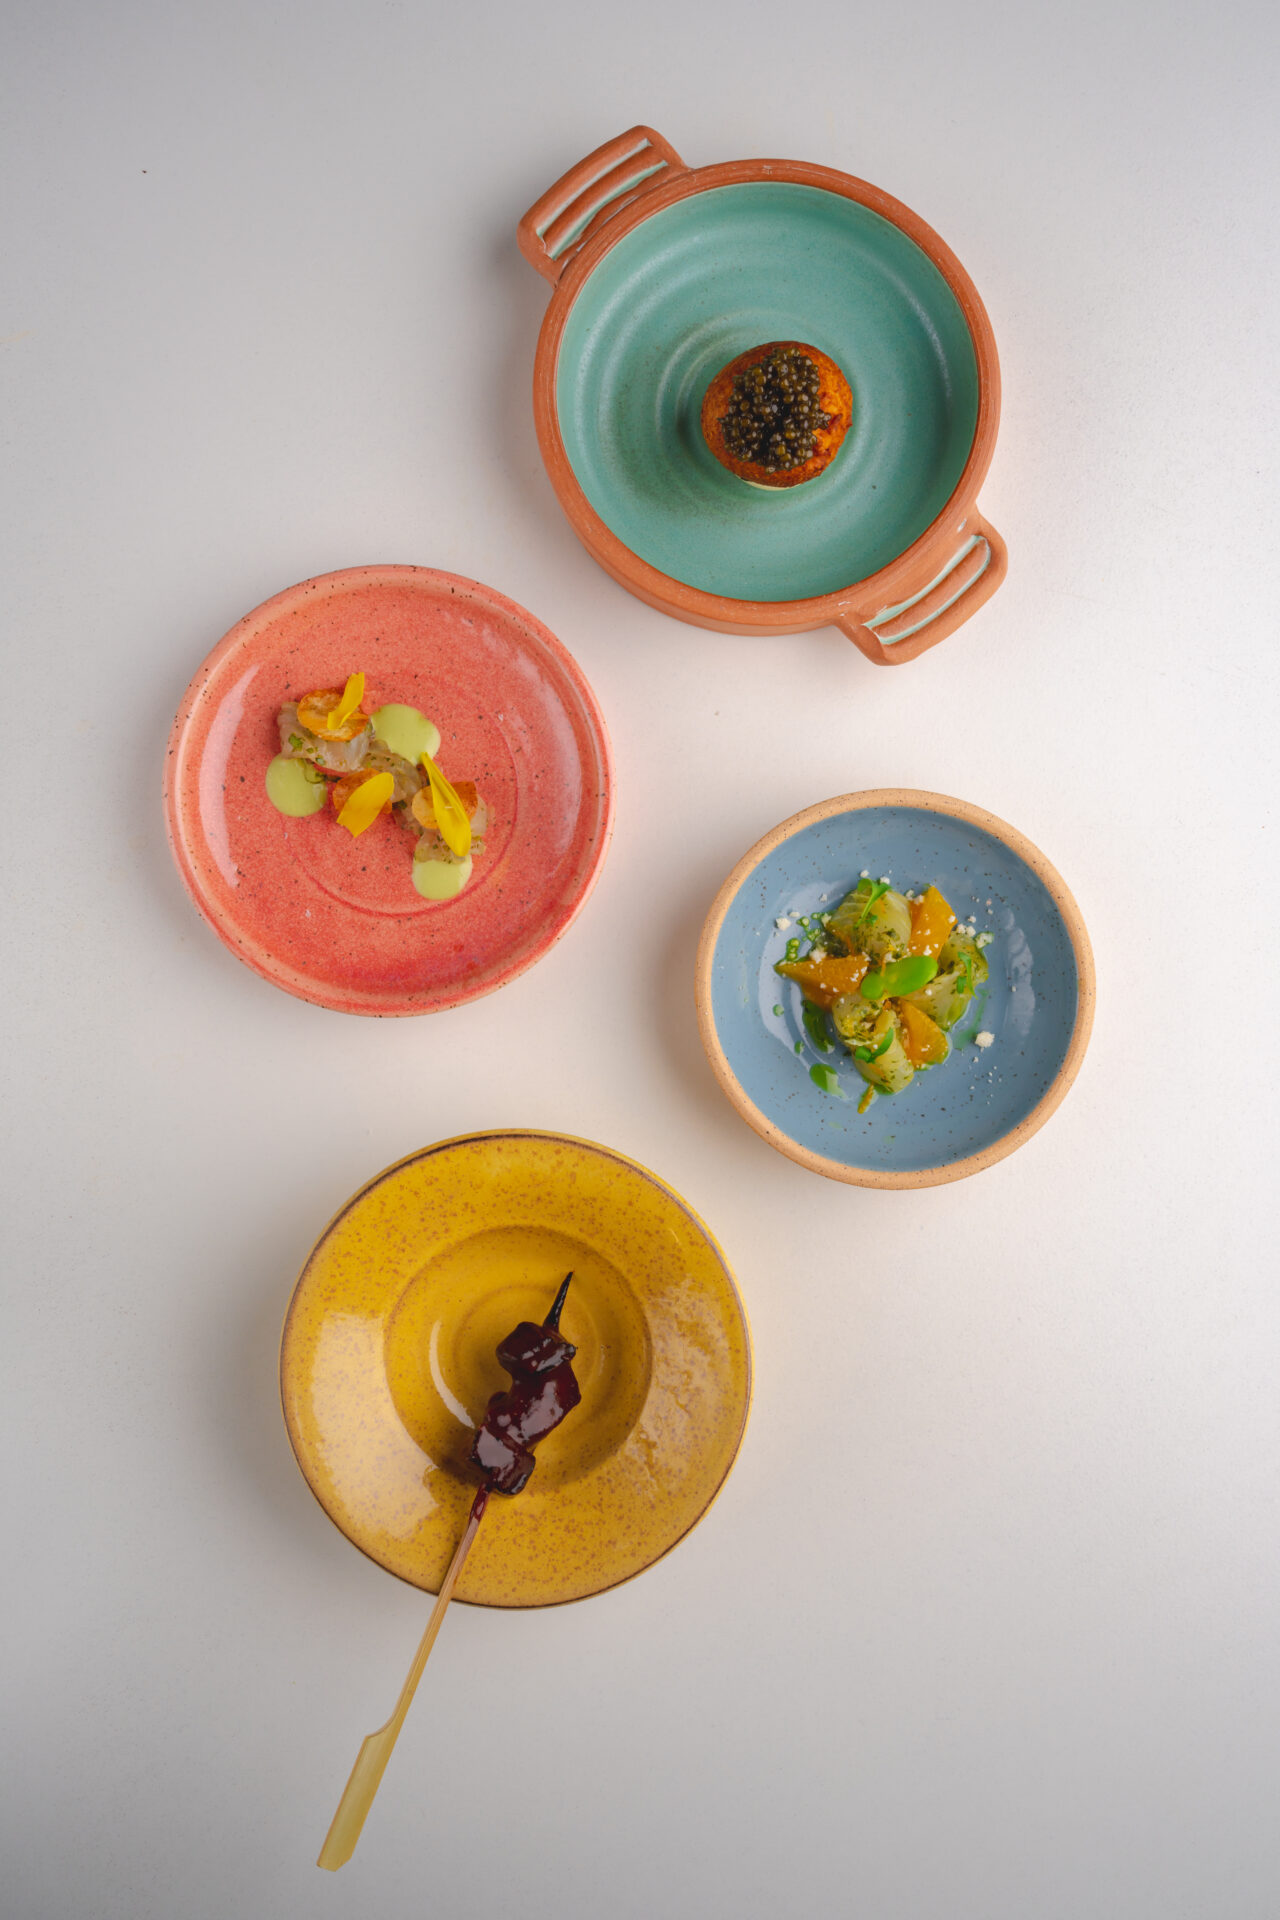 Street Food served on colorful plates at counter-